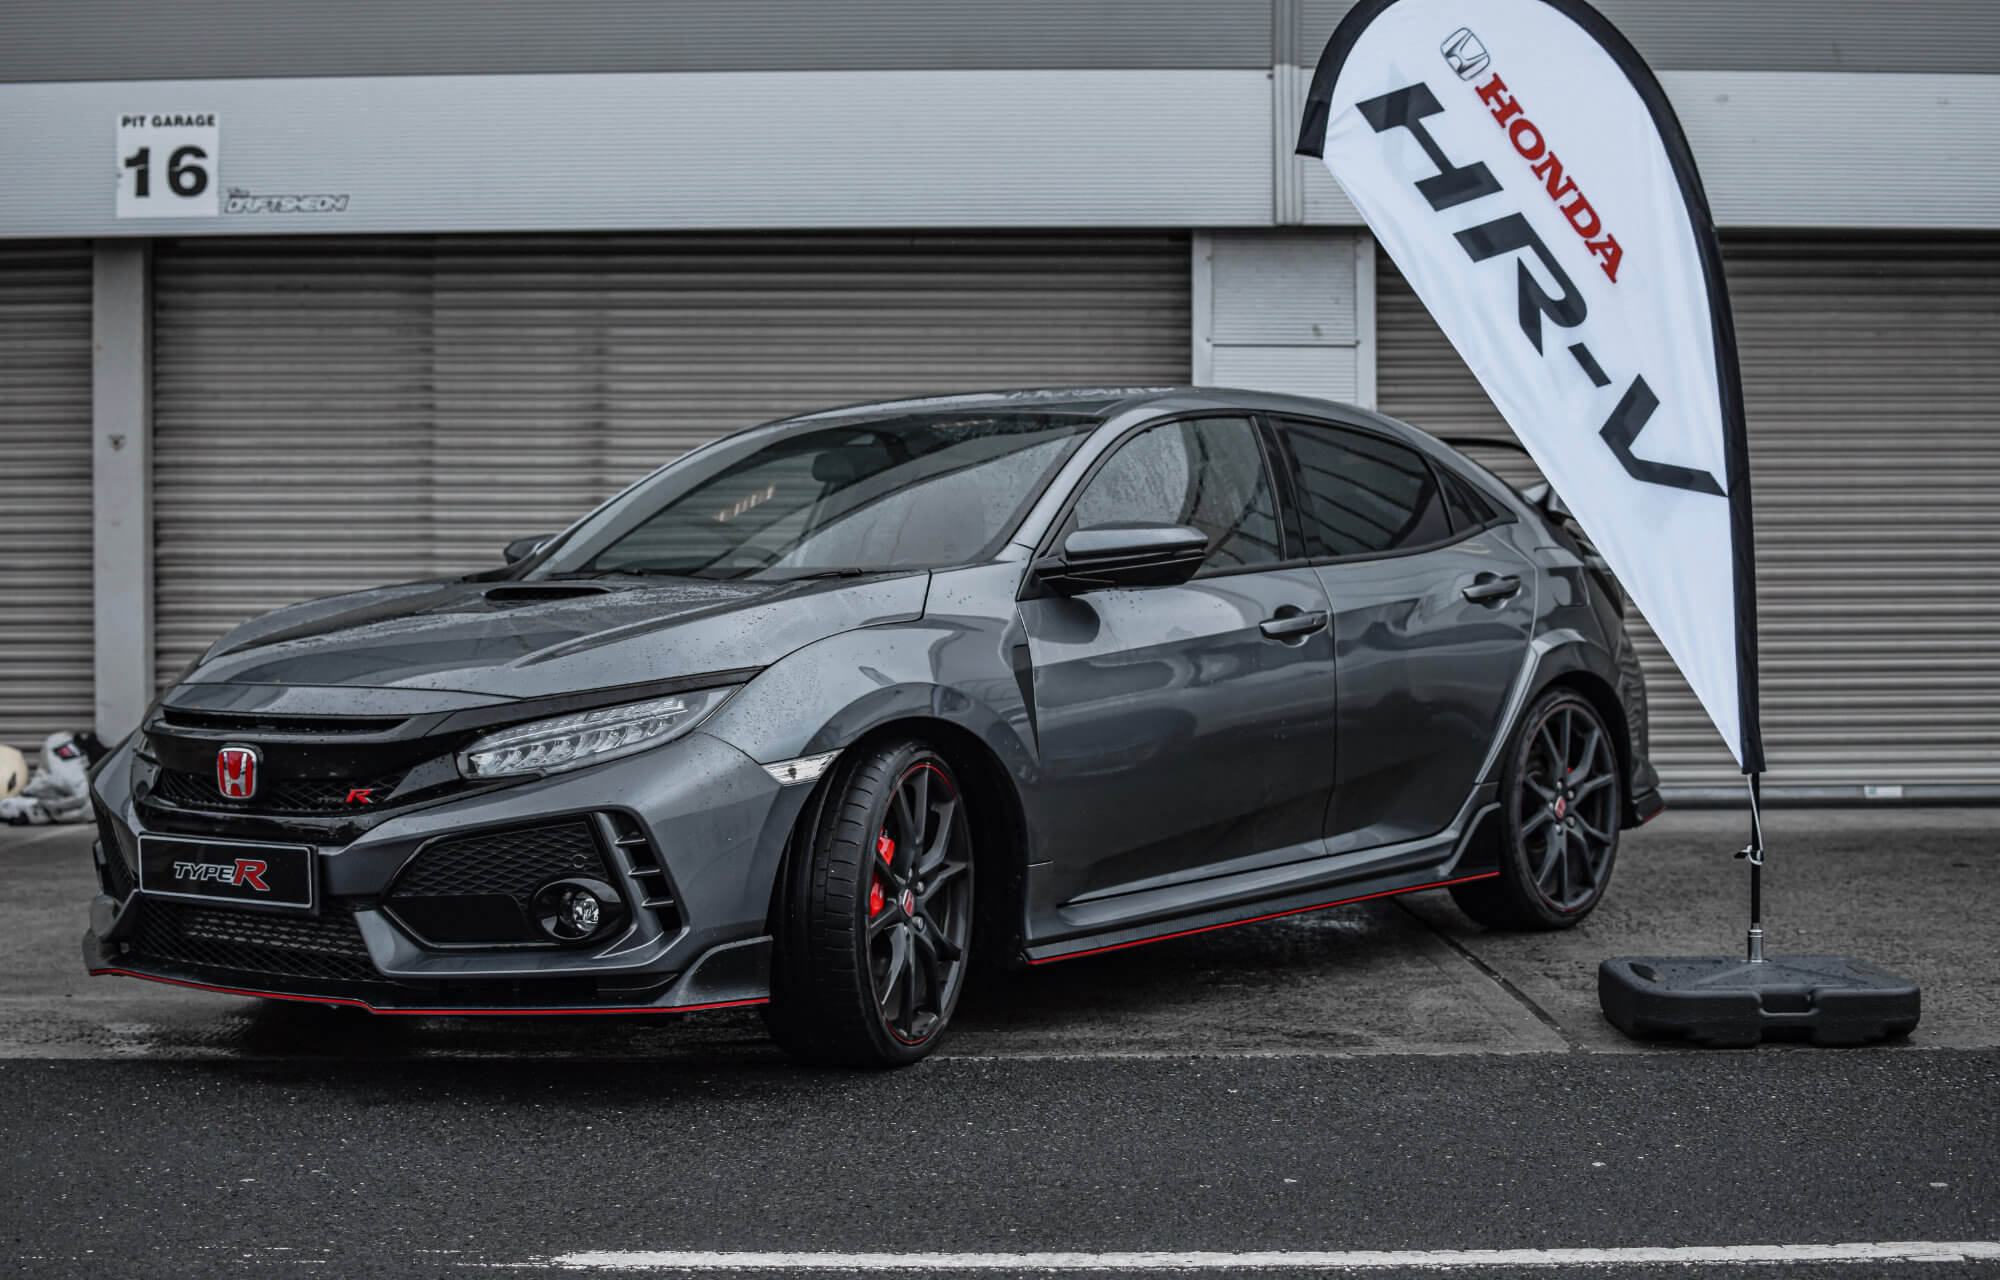 Honda at Mondello Race Track with the NSX and Civic Type R